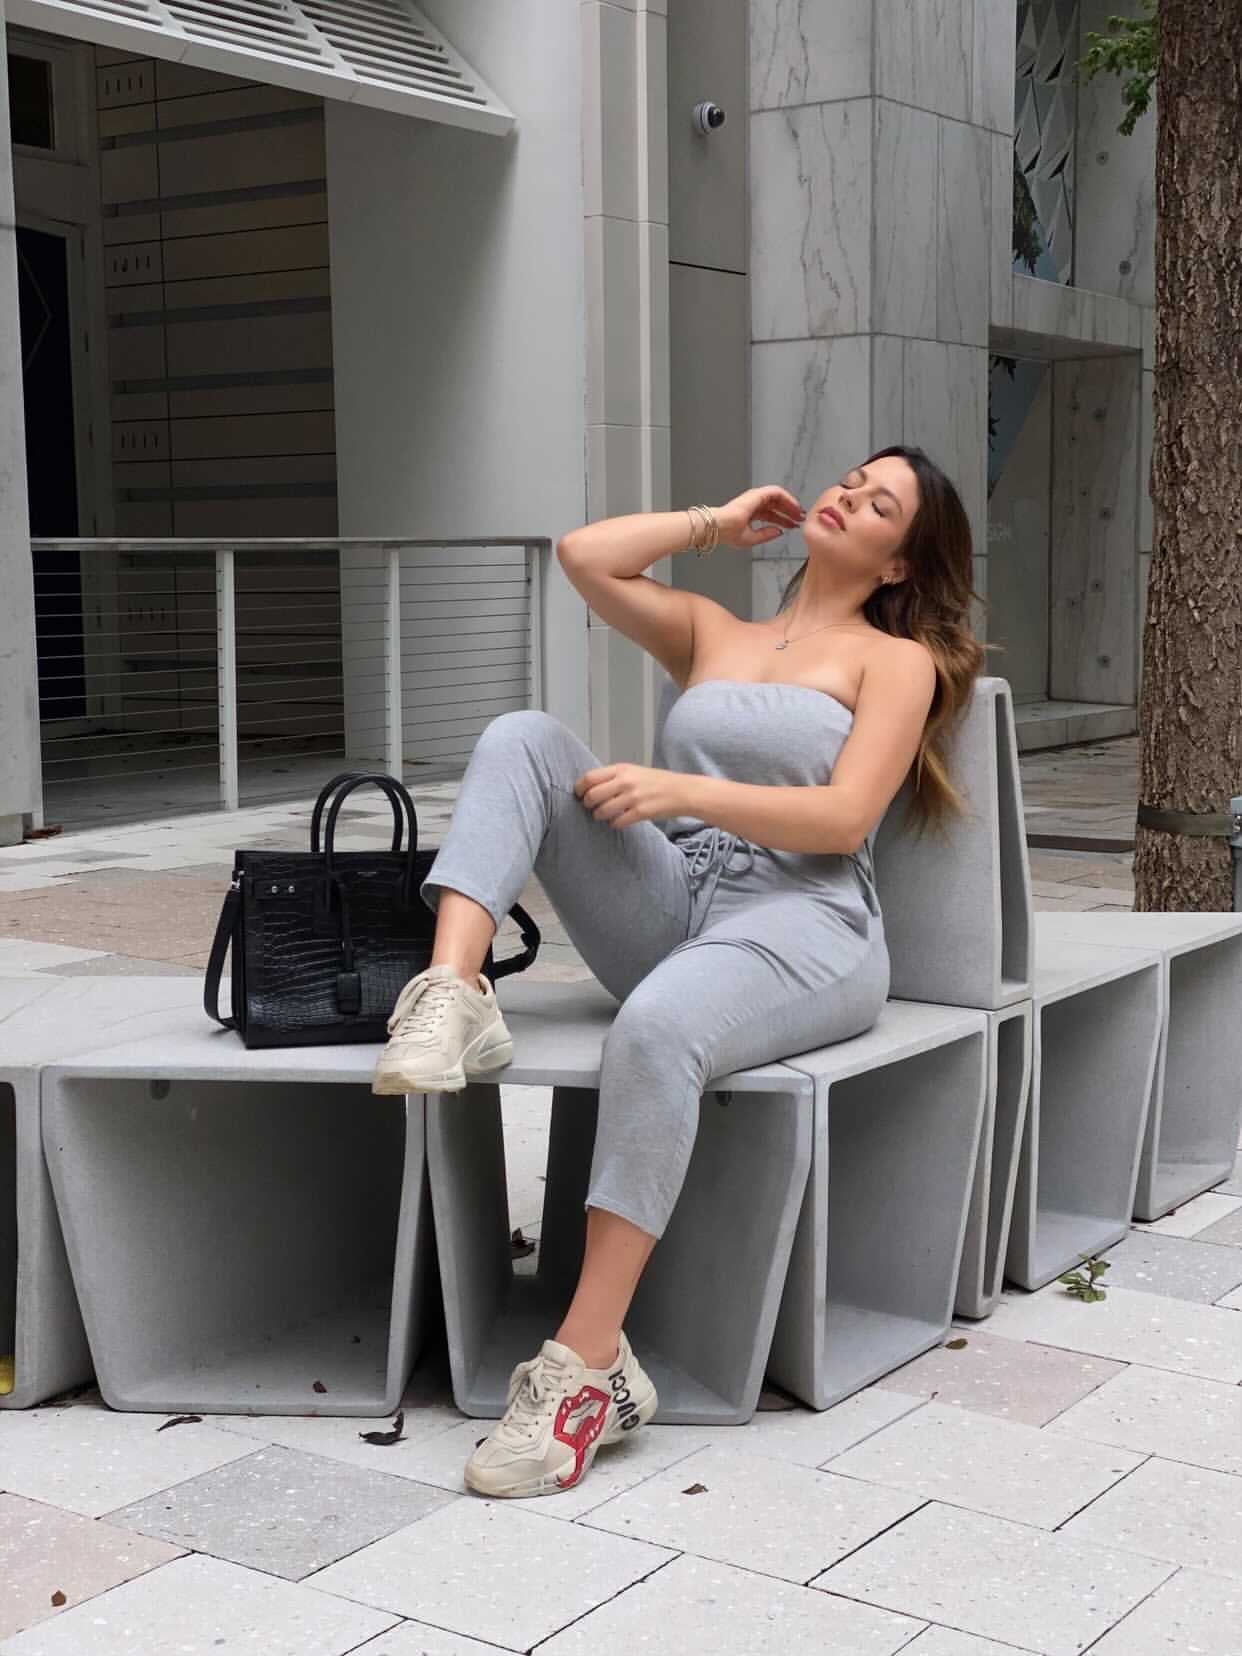 Heather Grey Ankle Length Strapless Jumpsuit